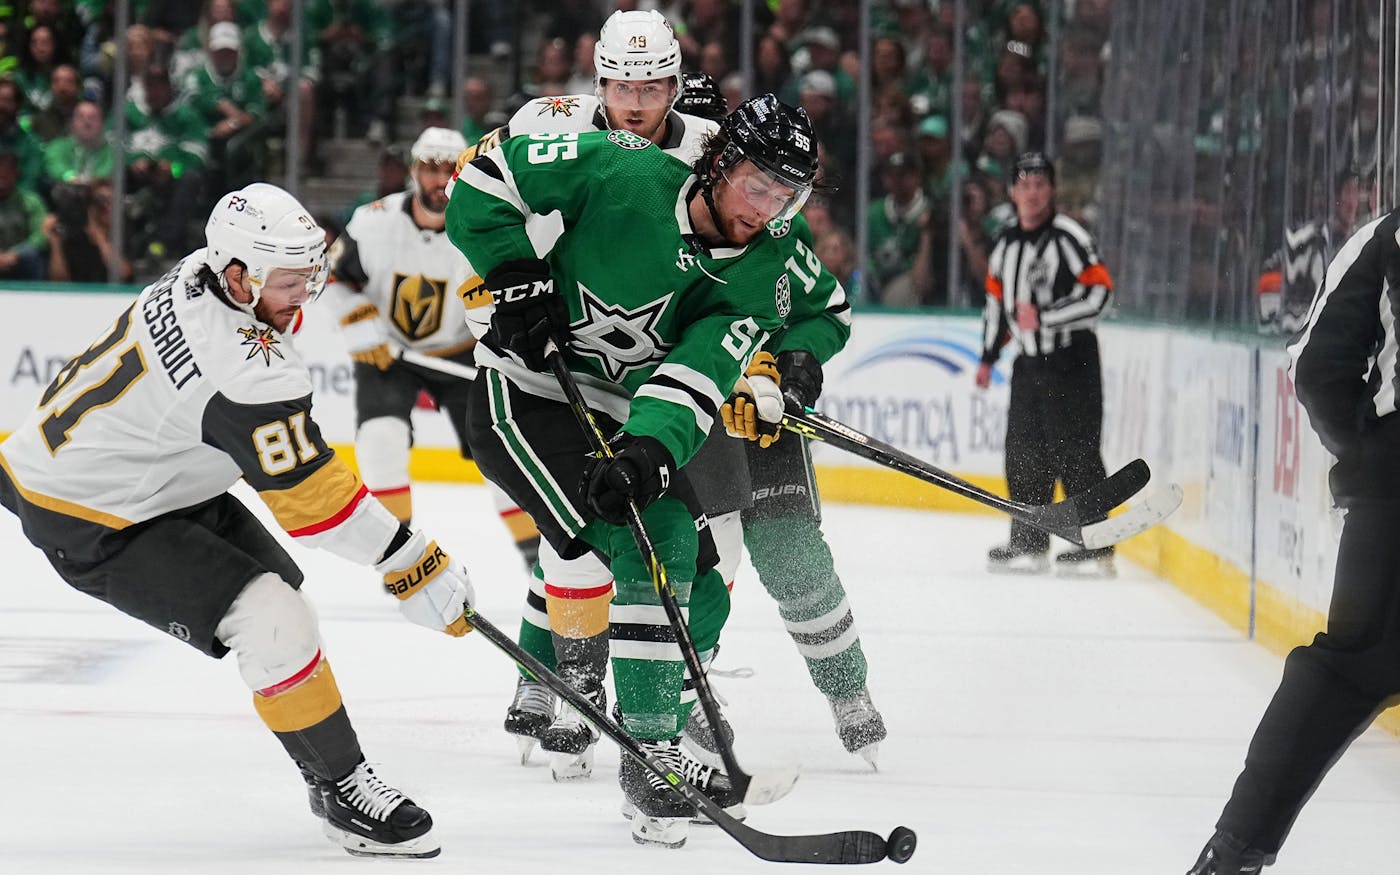 Dallas Stars captain Jamie Benn suspended two games for cross-checking -  Daily Faceoff